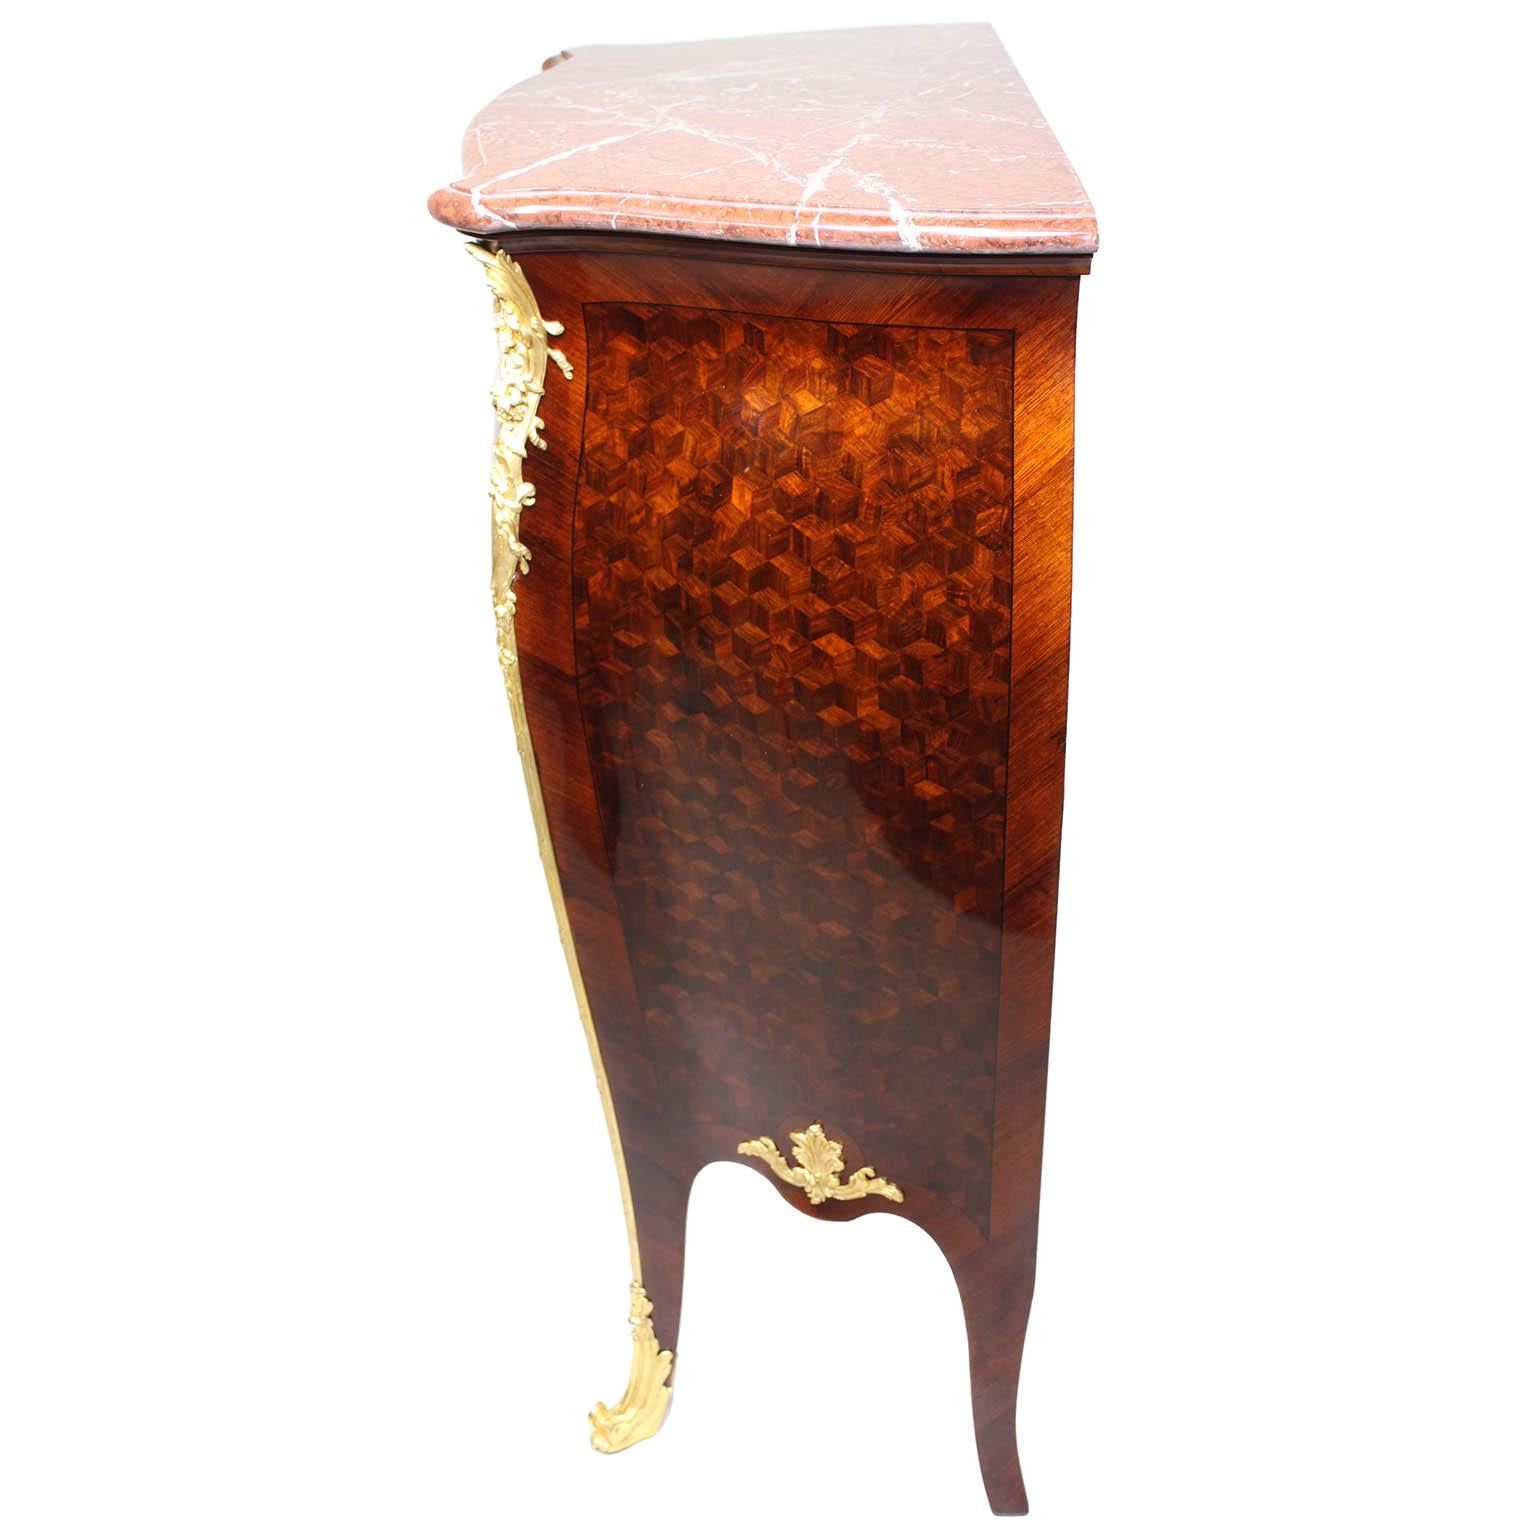 French 19th C. Louis XV Style Ormolu-Mounted Vernis Martin Cabinet by F. Linke For Sale 4